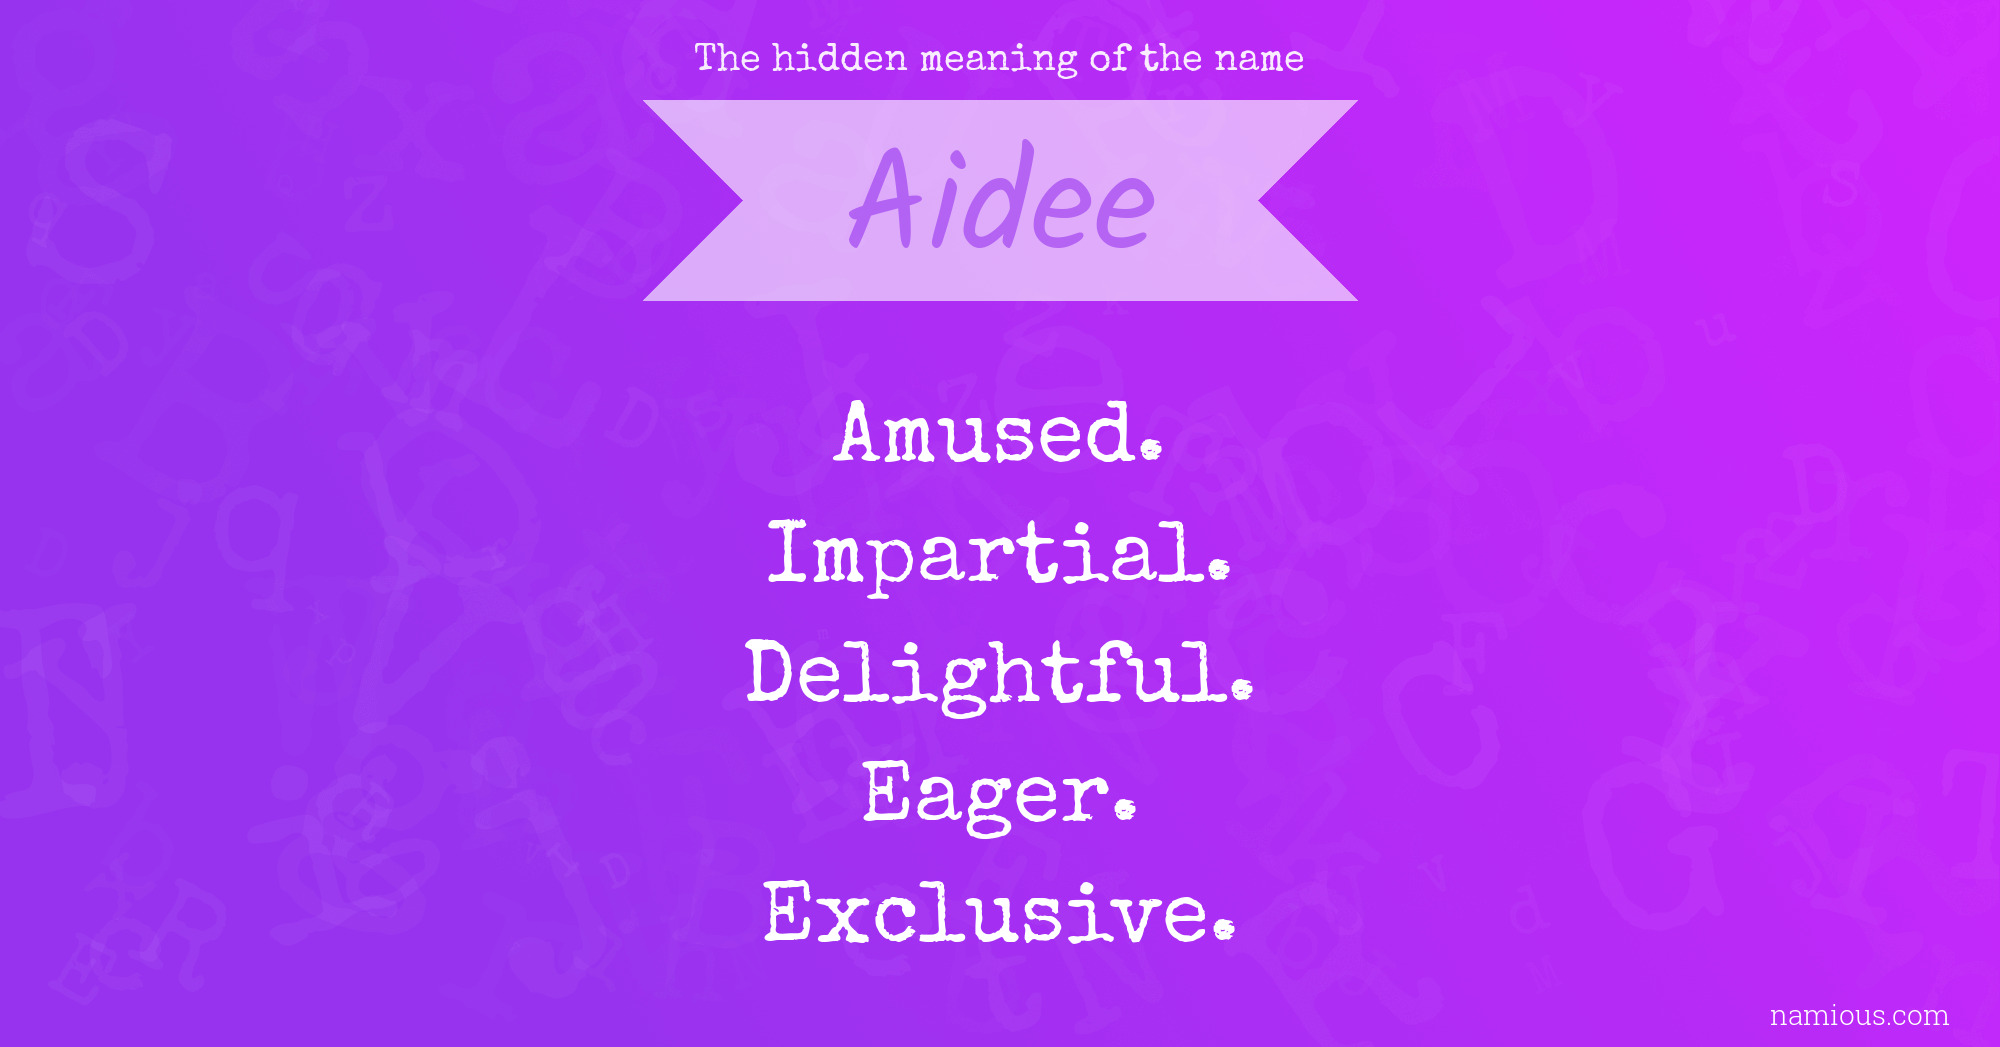 The hidden meaning of the name Aidee